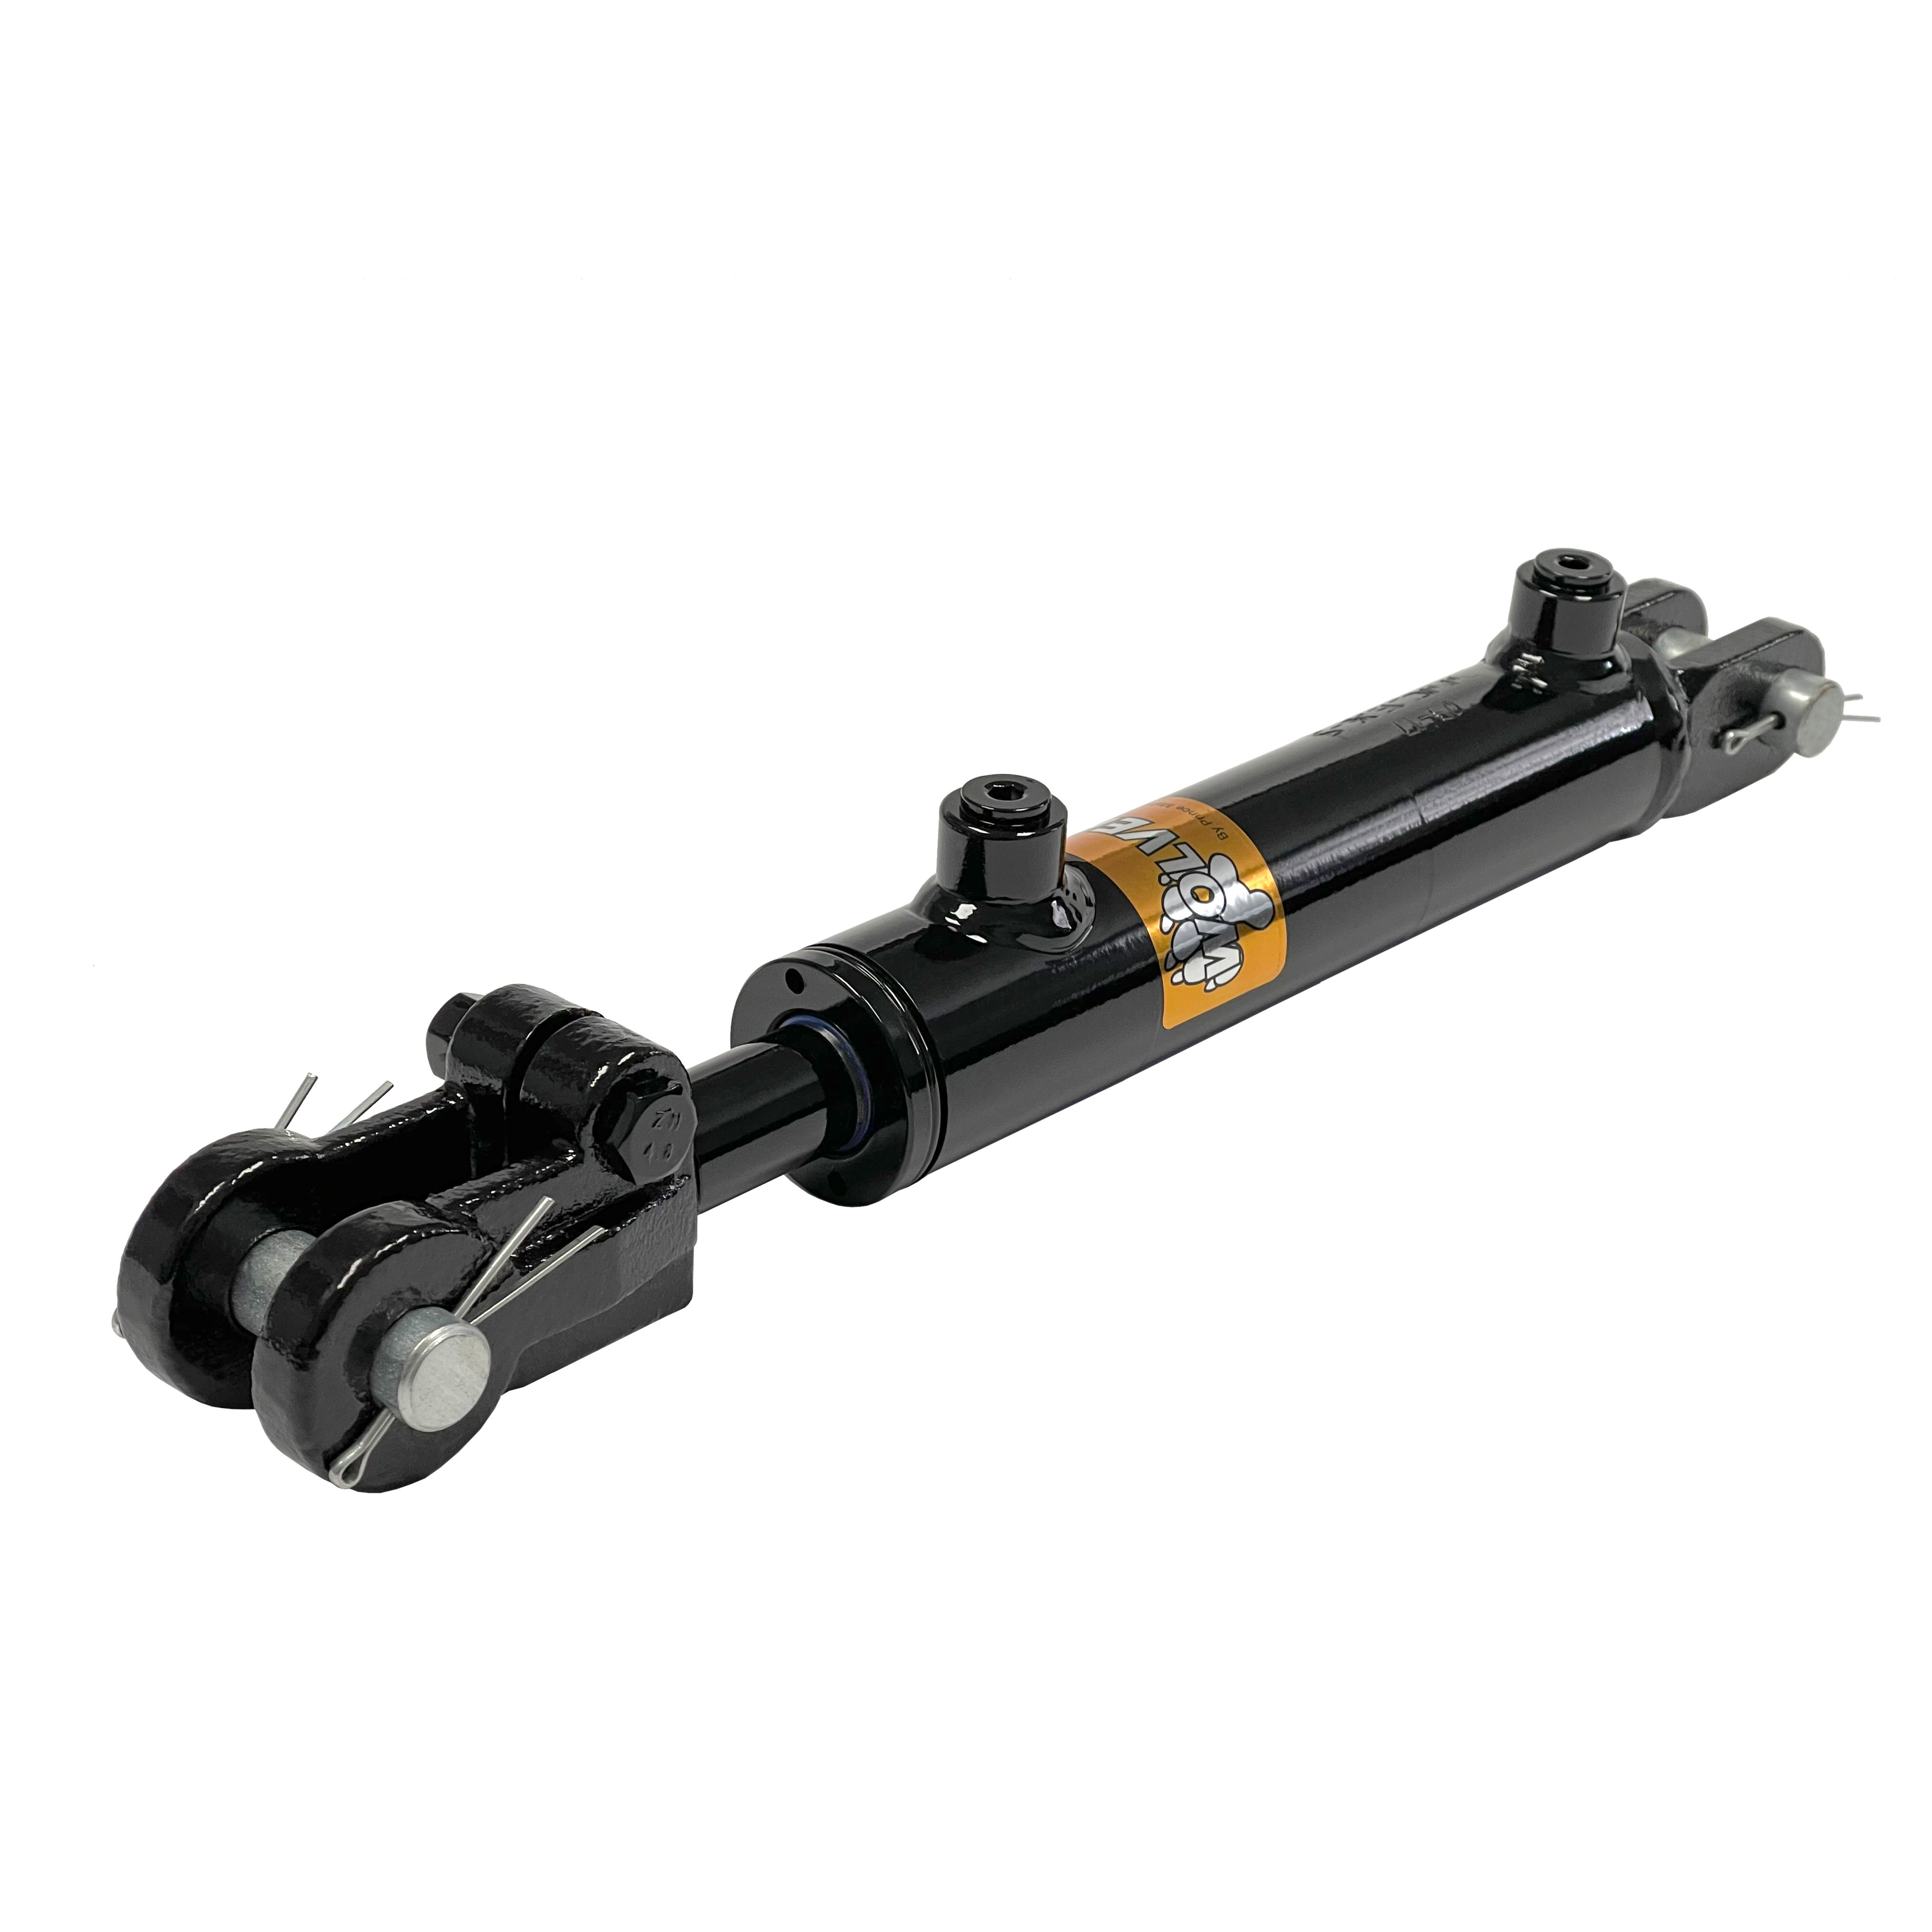 1.5 bore x 10 stroke Clevis hydraulic cylinder, welded Clevis double acting cylinder | Prince Hydraulics